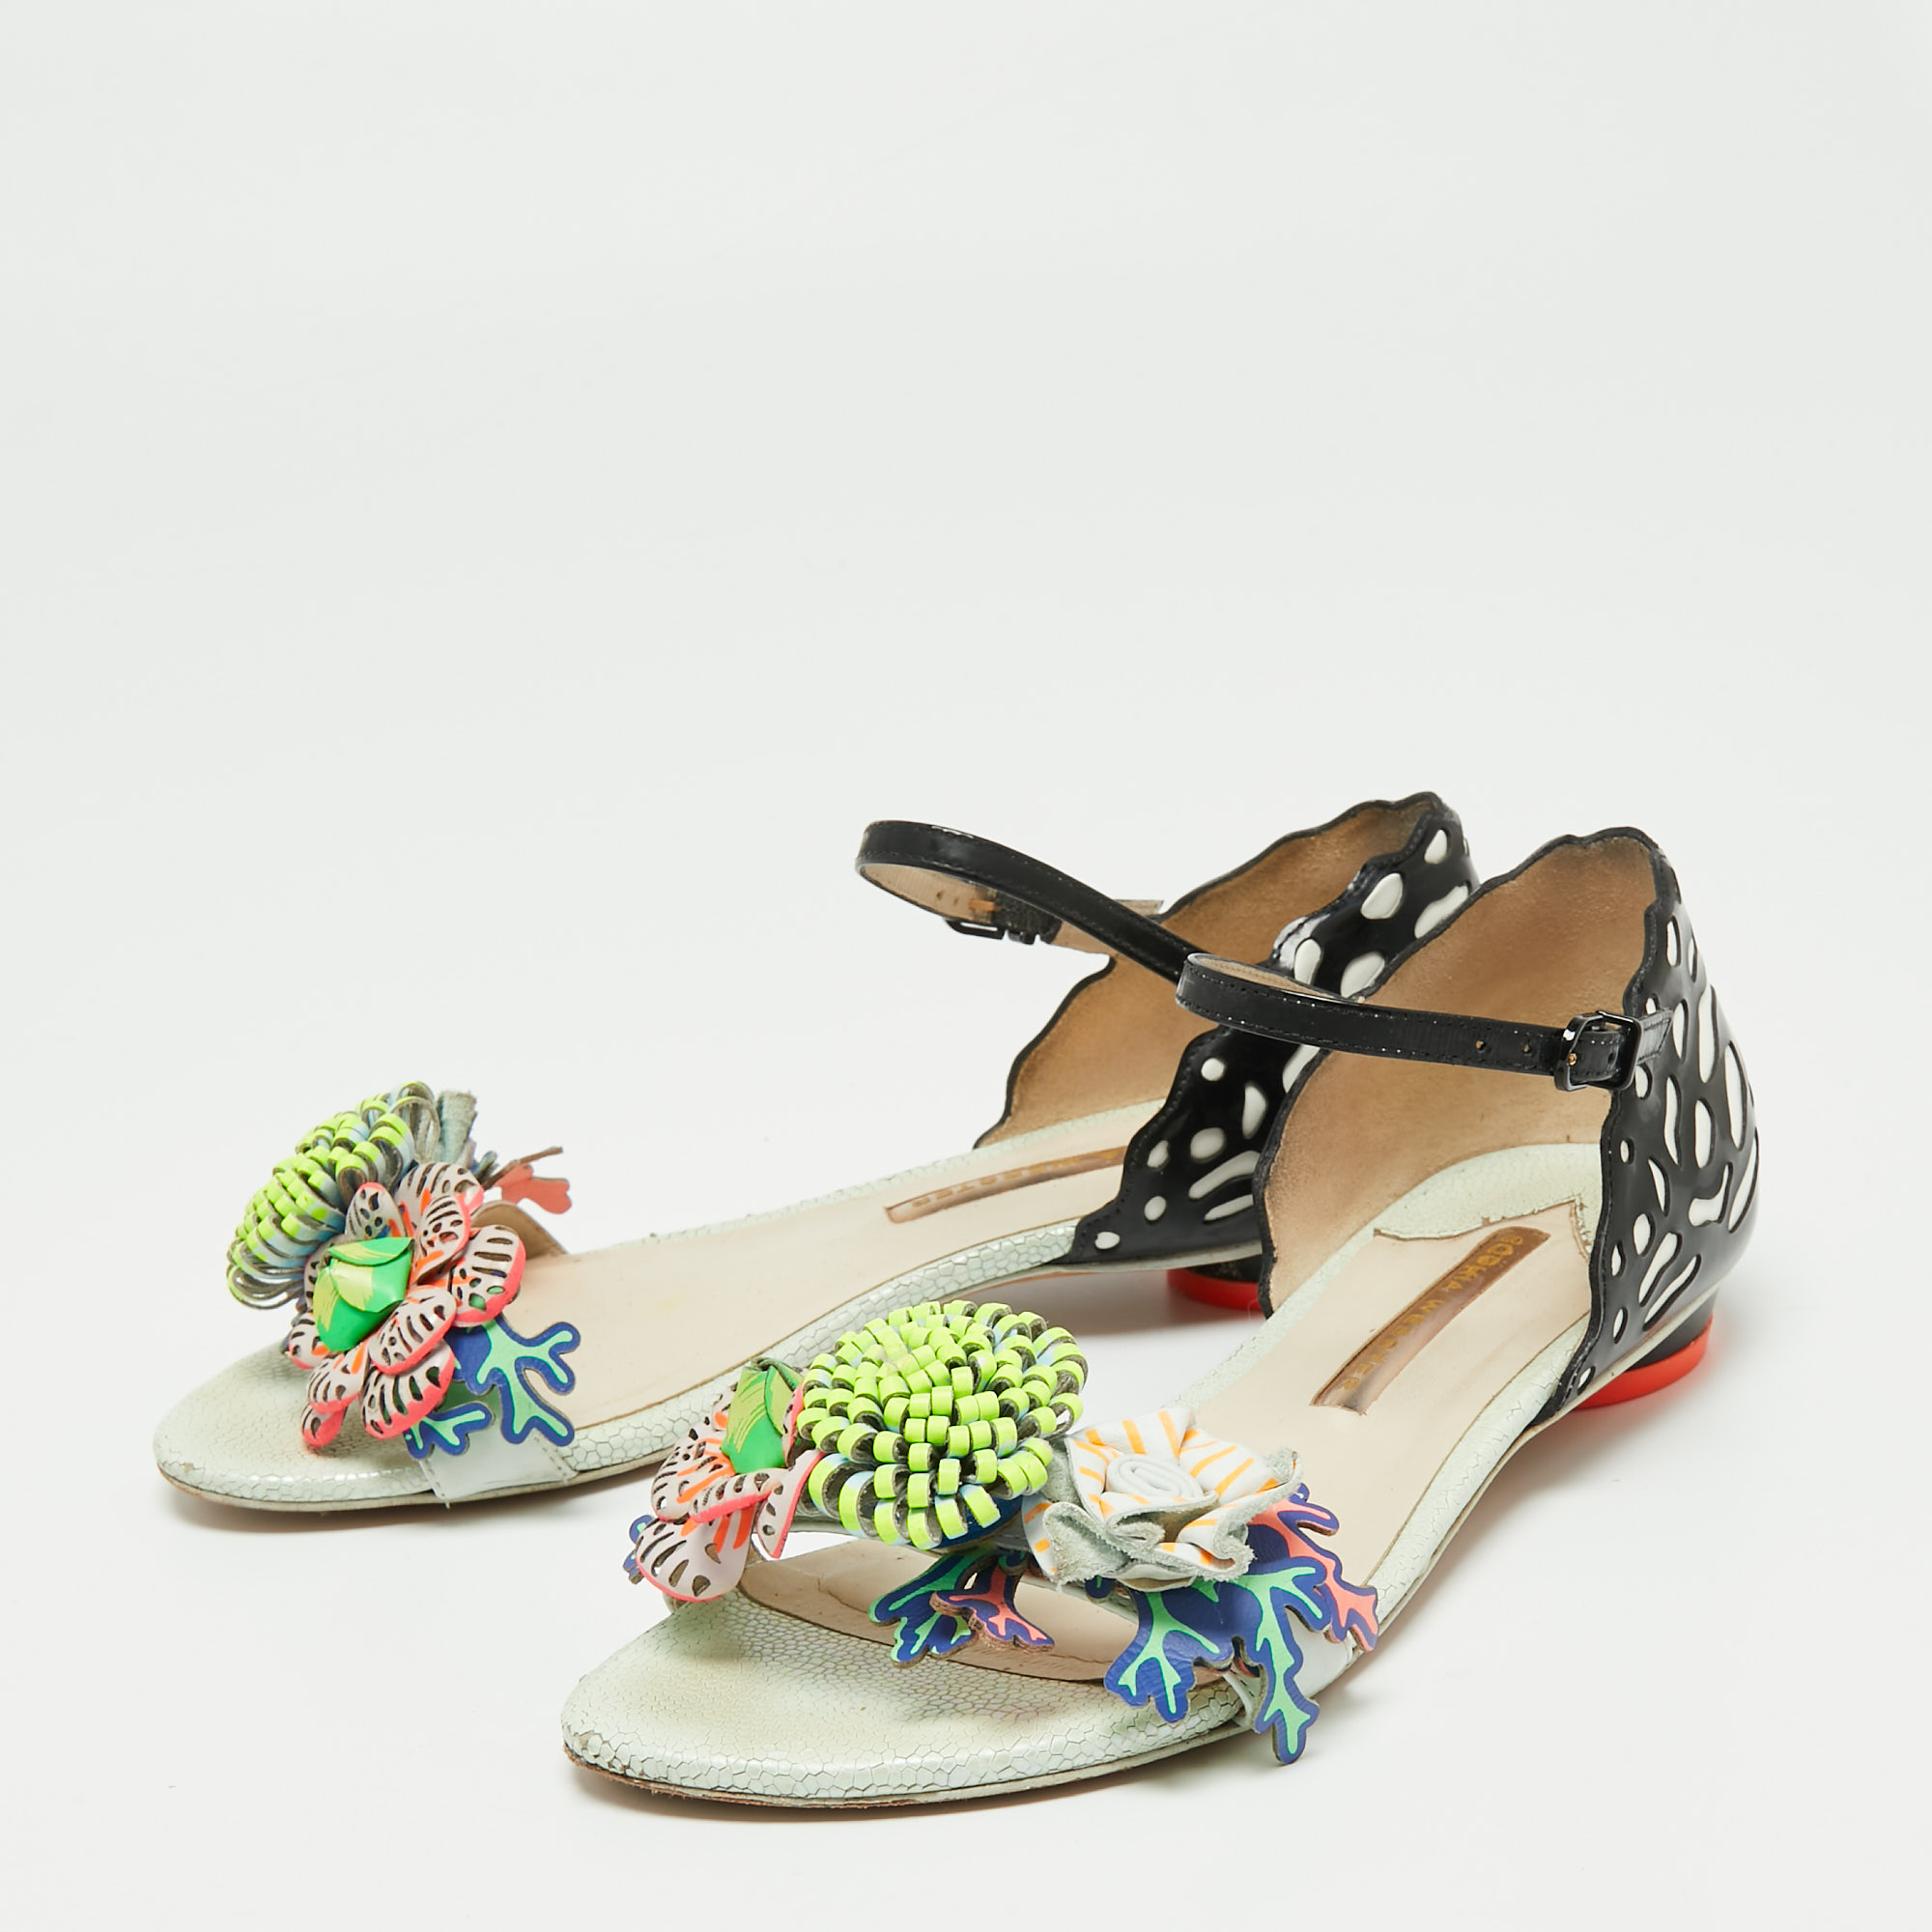 

Sophia Webster Multicolor Patent And Leather Lilico Underwater Floral Embellished Flat Sandals Size